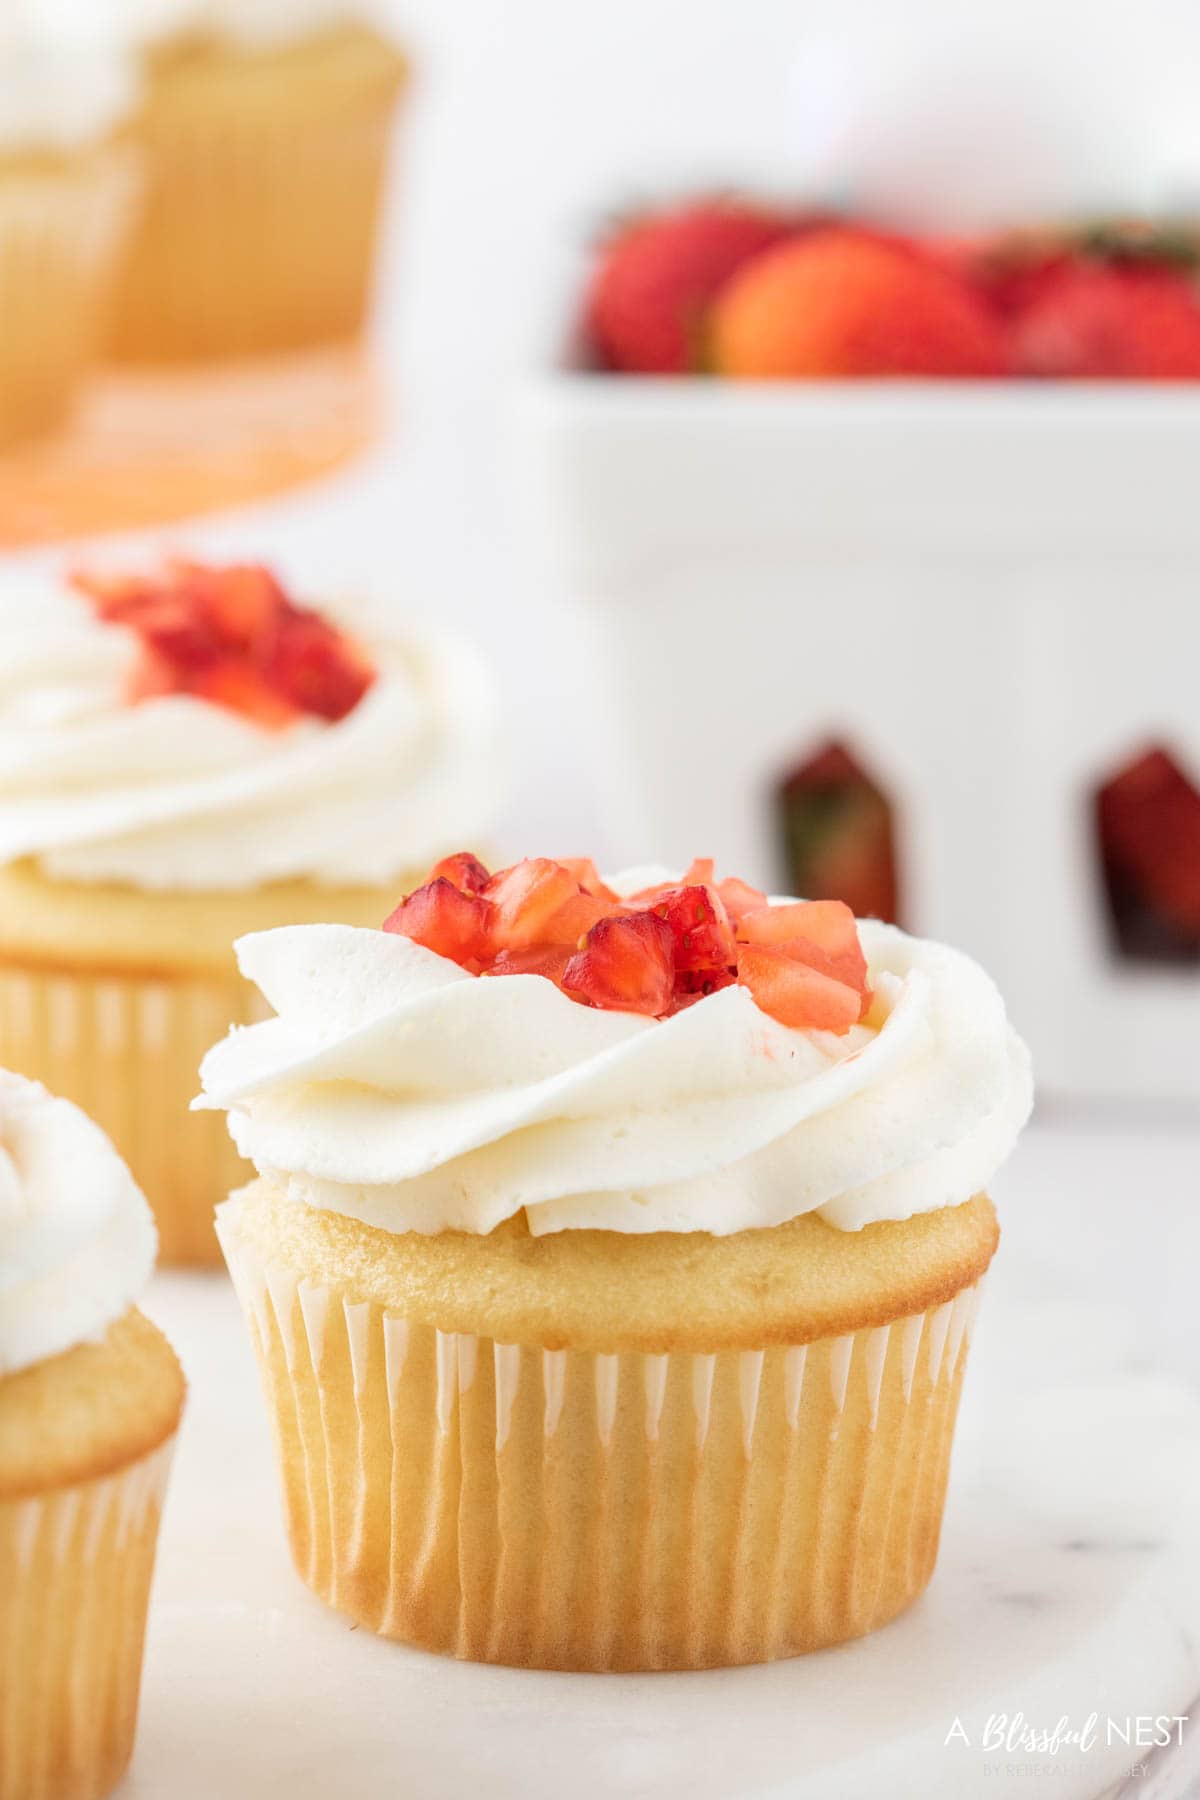 Strawberry Cupcakes With Strawberry Filling